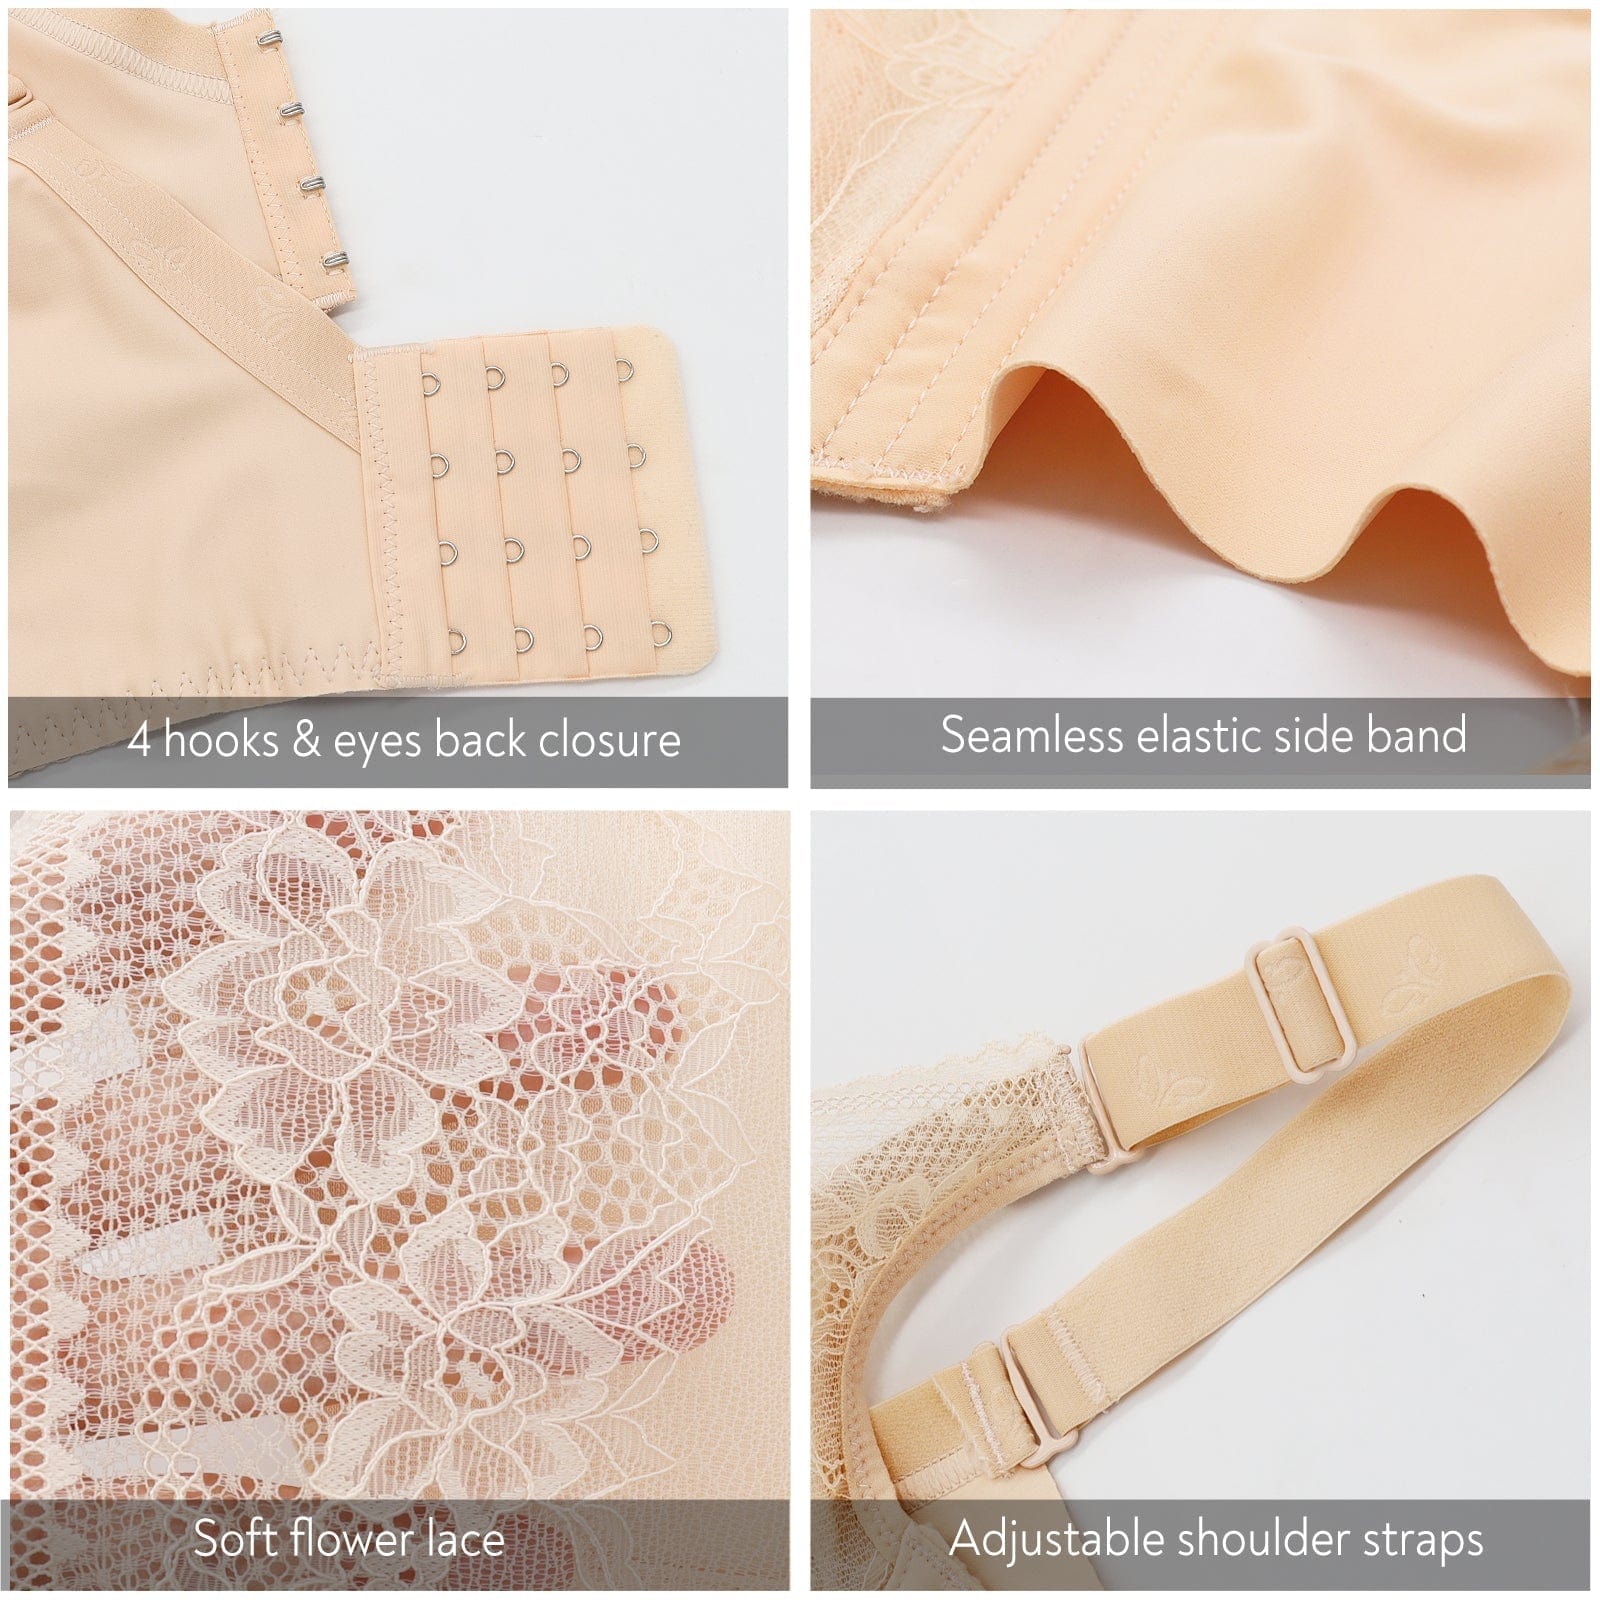 Details of FallSweet Redefines Comfort Push Up Underwire Lace bra